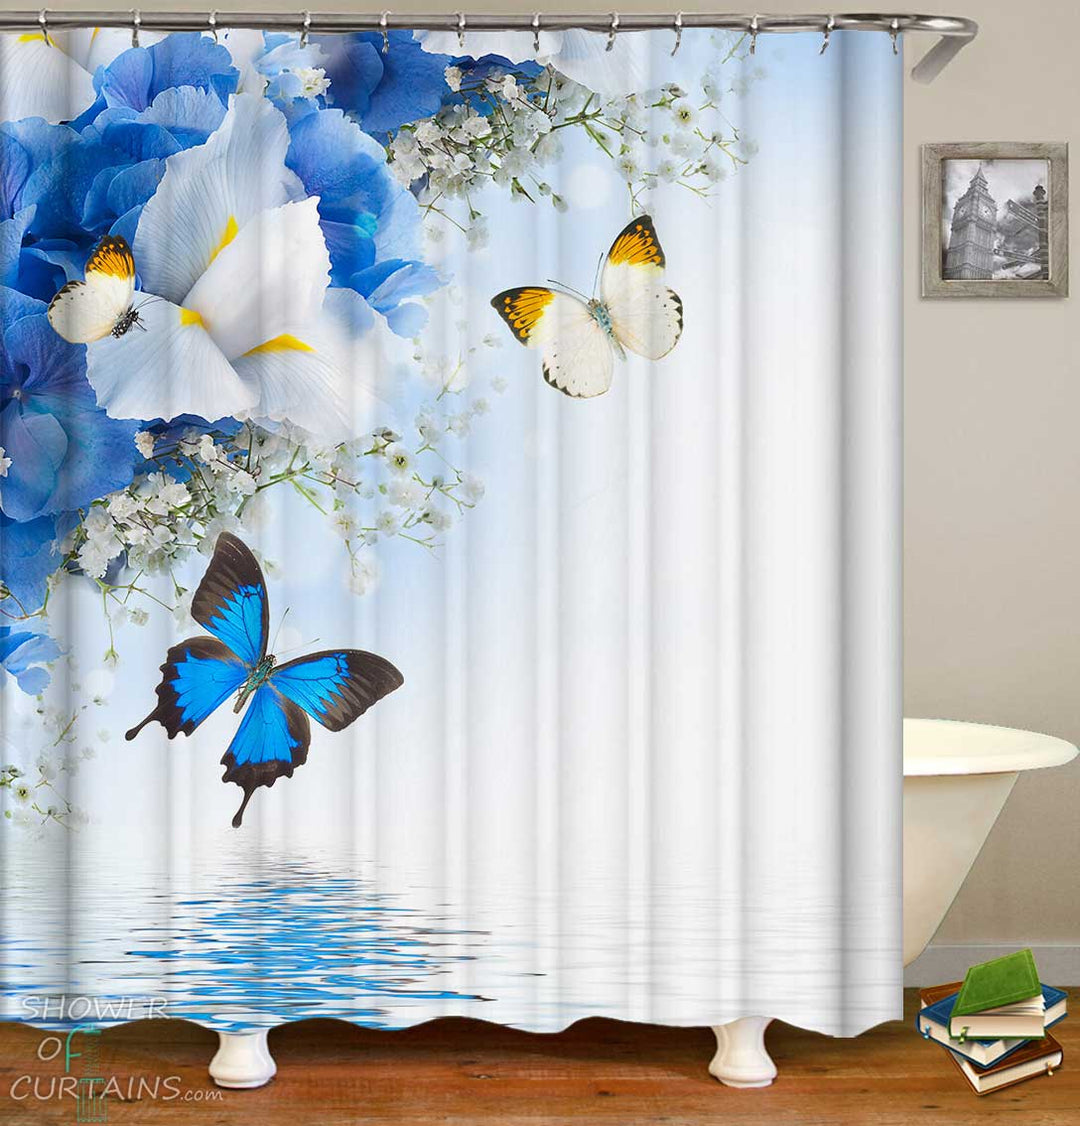 Shower Curtains with Blue White Butterflies and Flowers